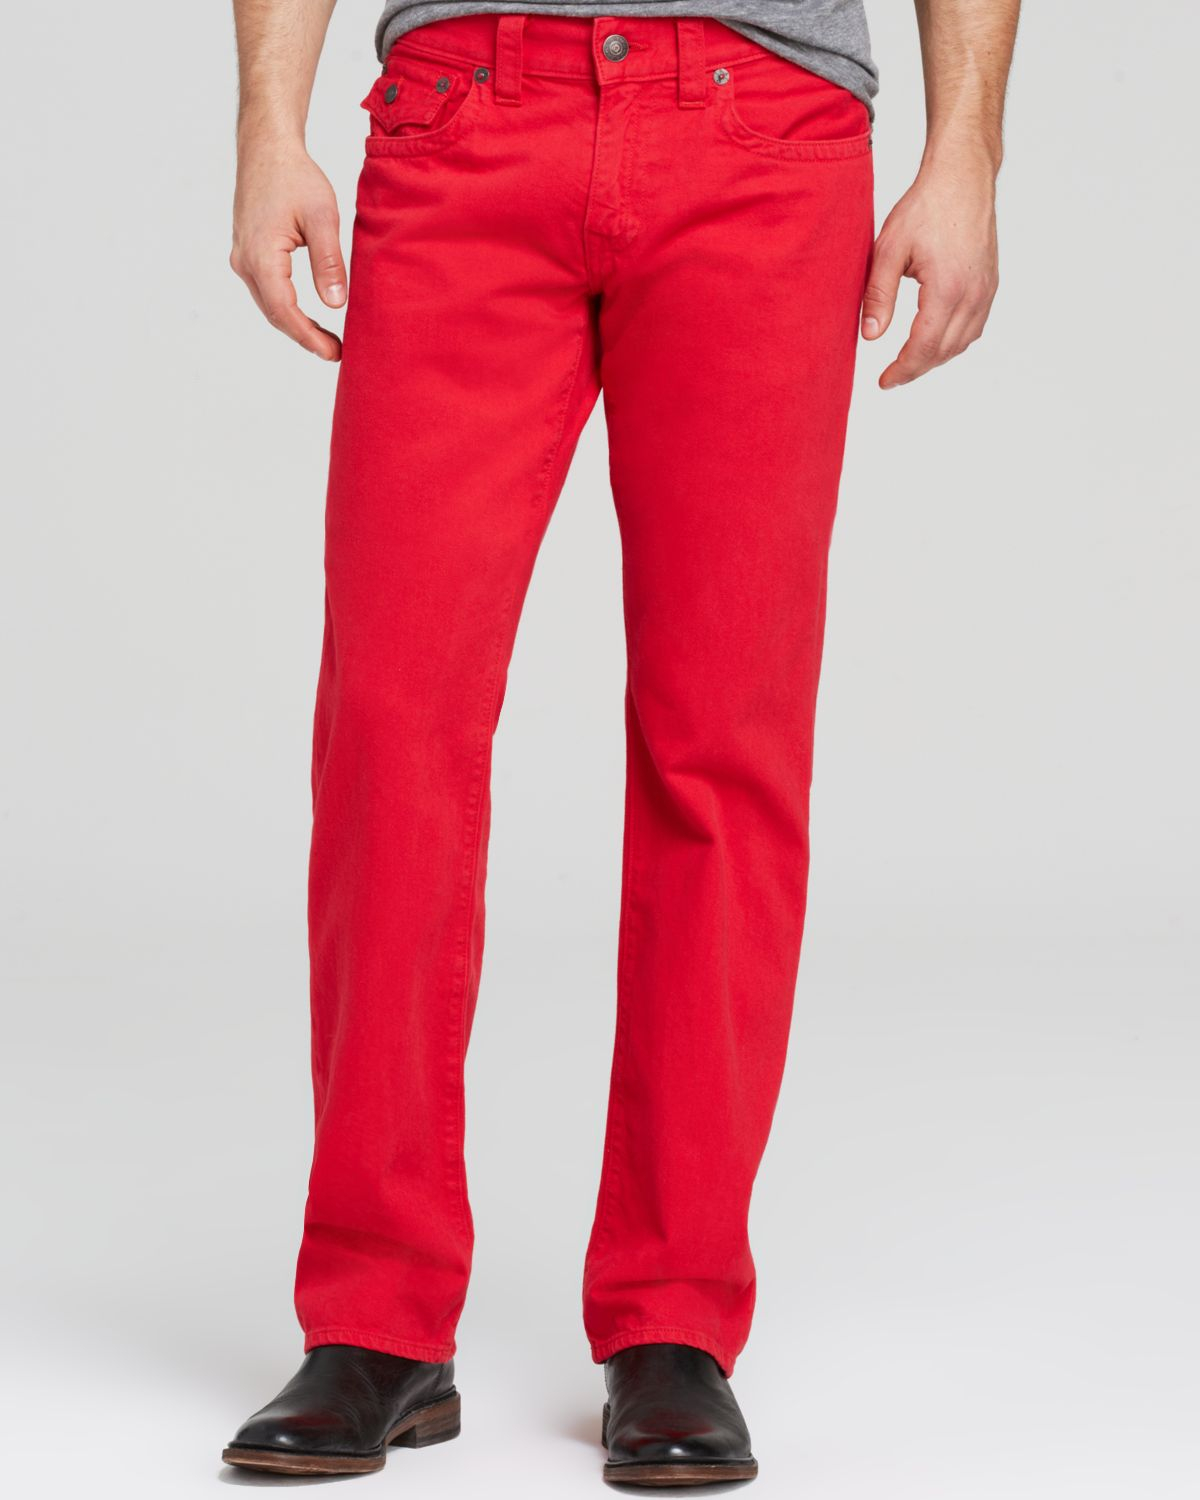 True Religion Jeans - Ricky Straight Fit In True Red in Red for Men - Lyst